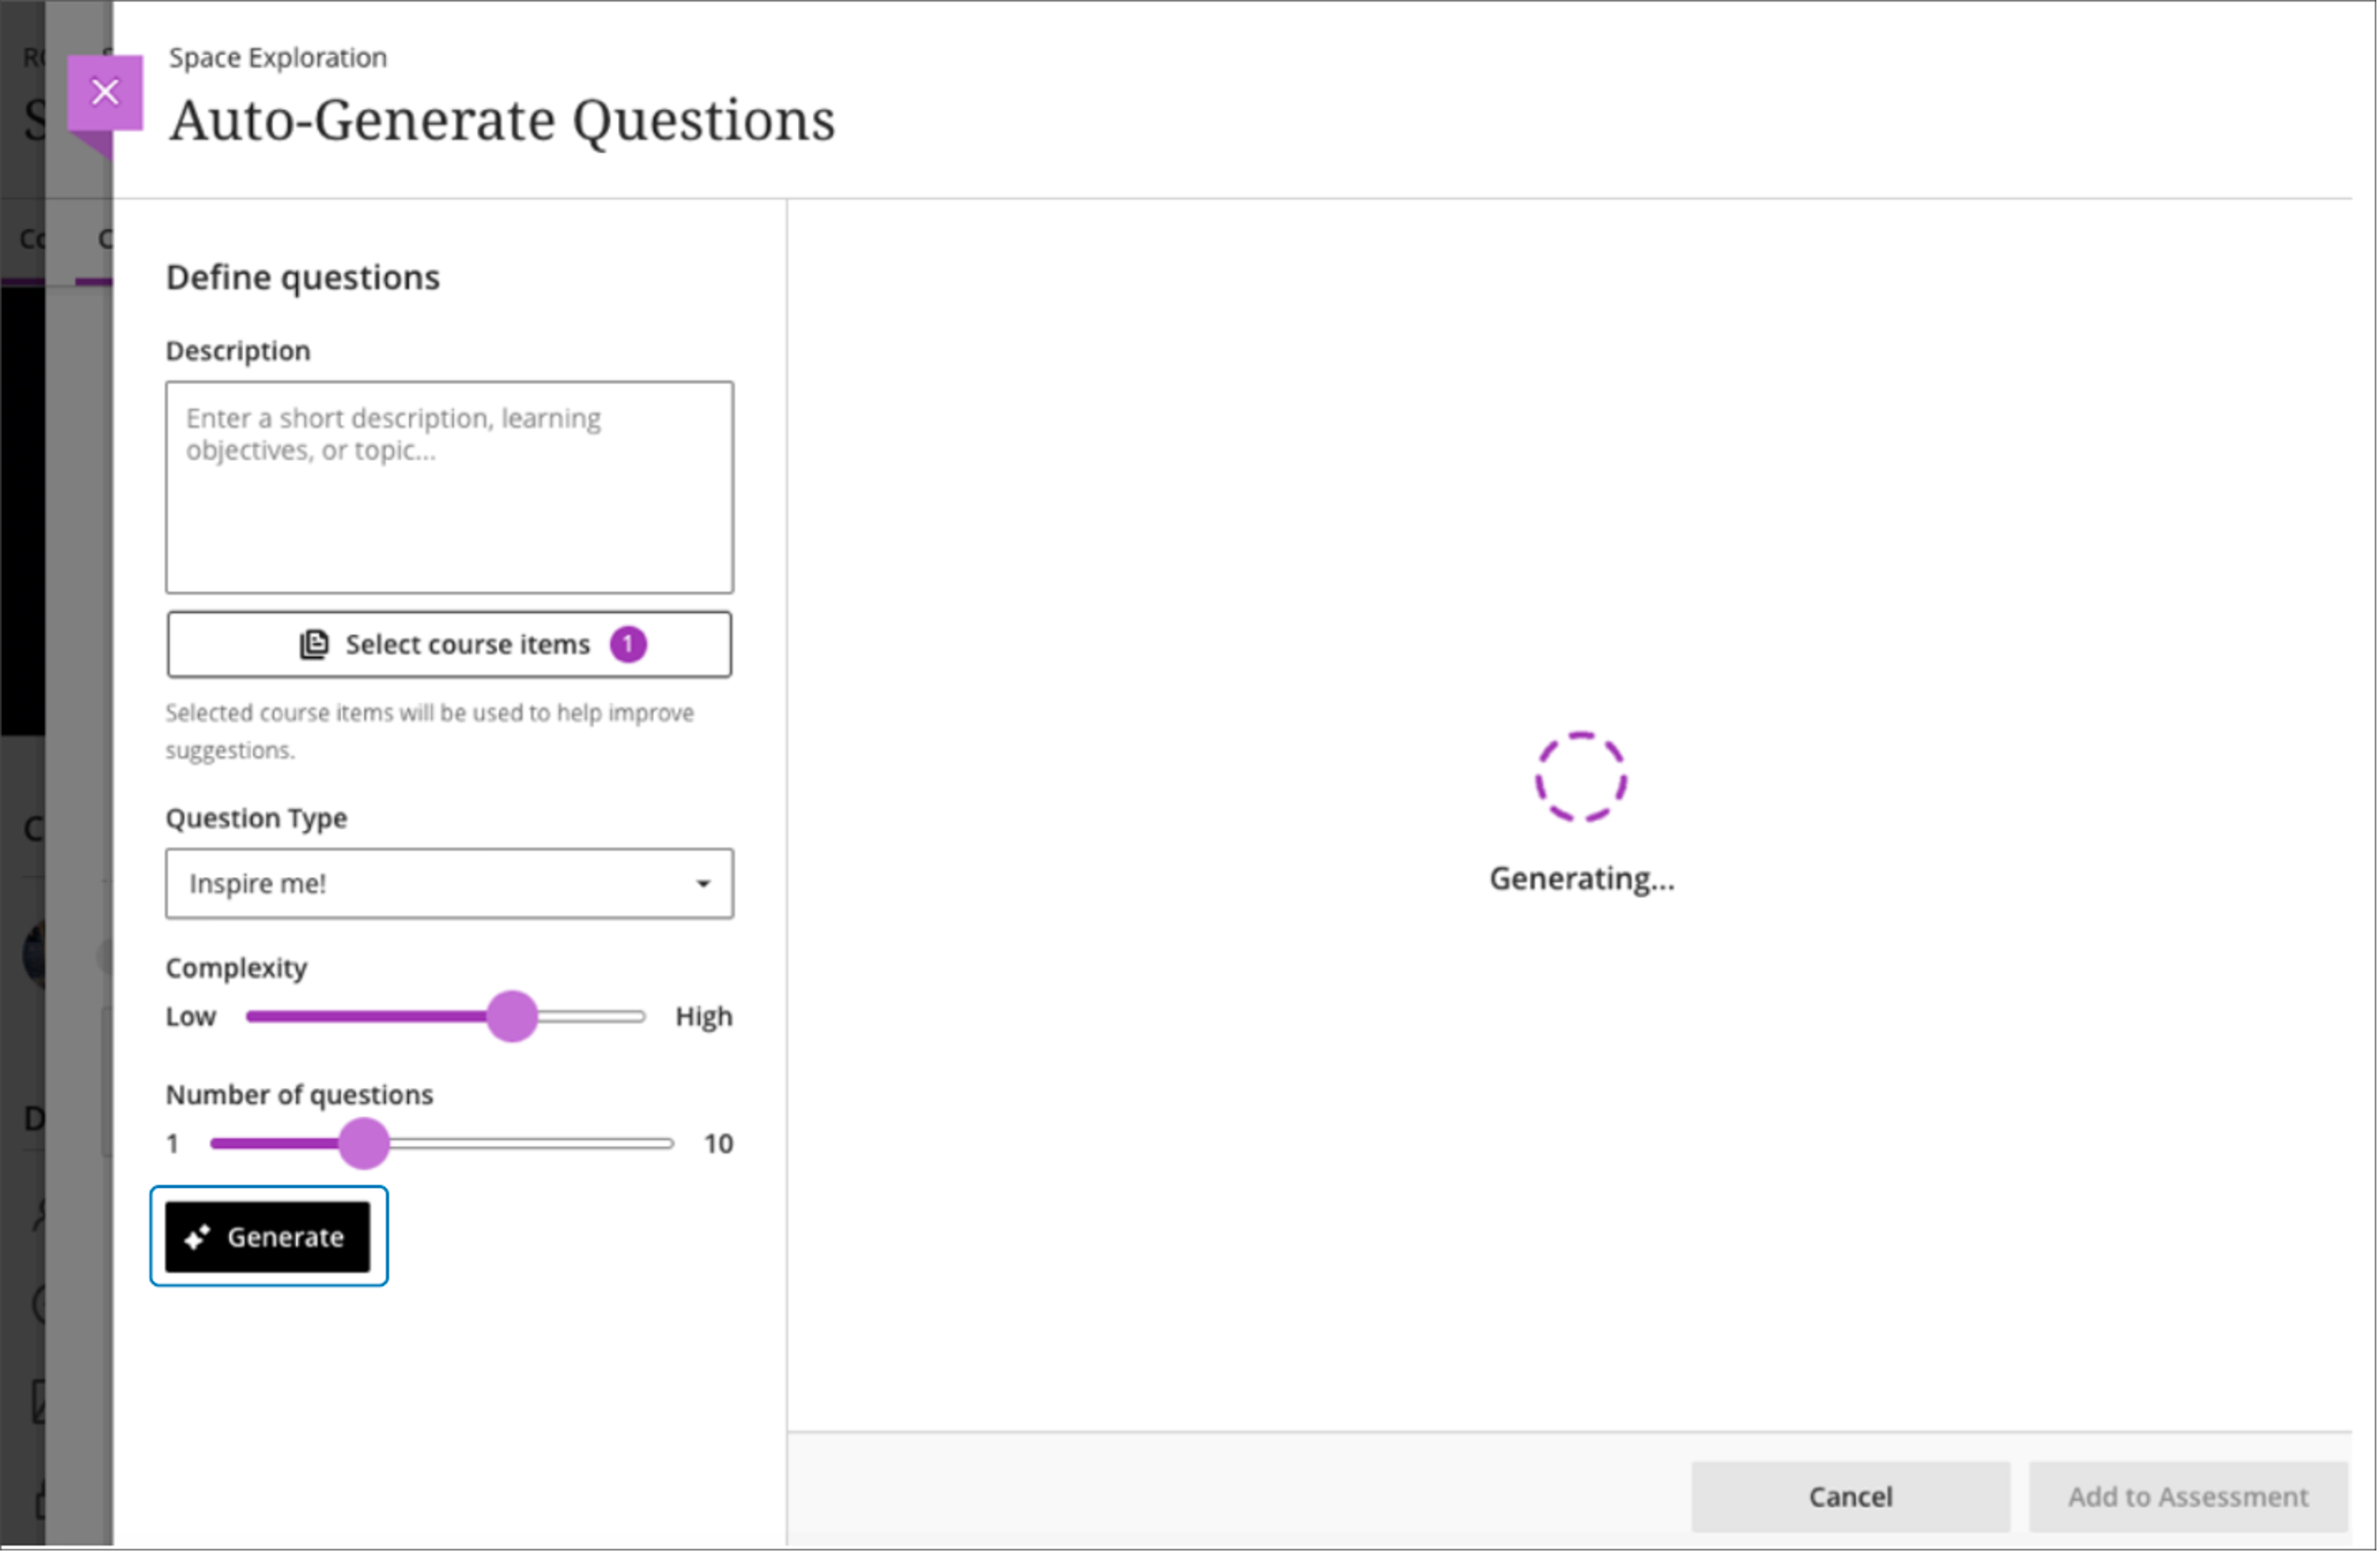 Select ‘Generate’ to apply the context to the generation workflow